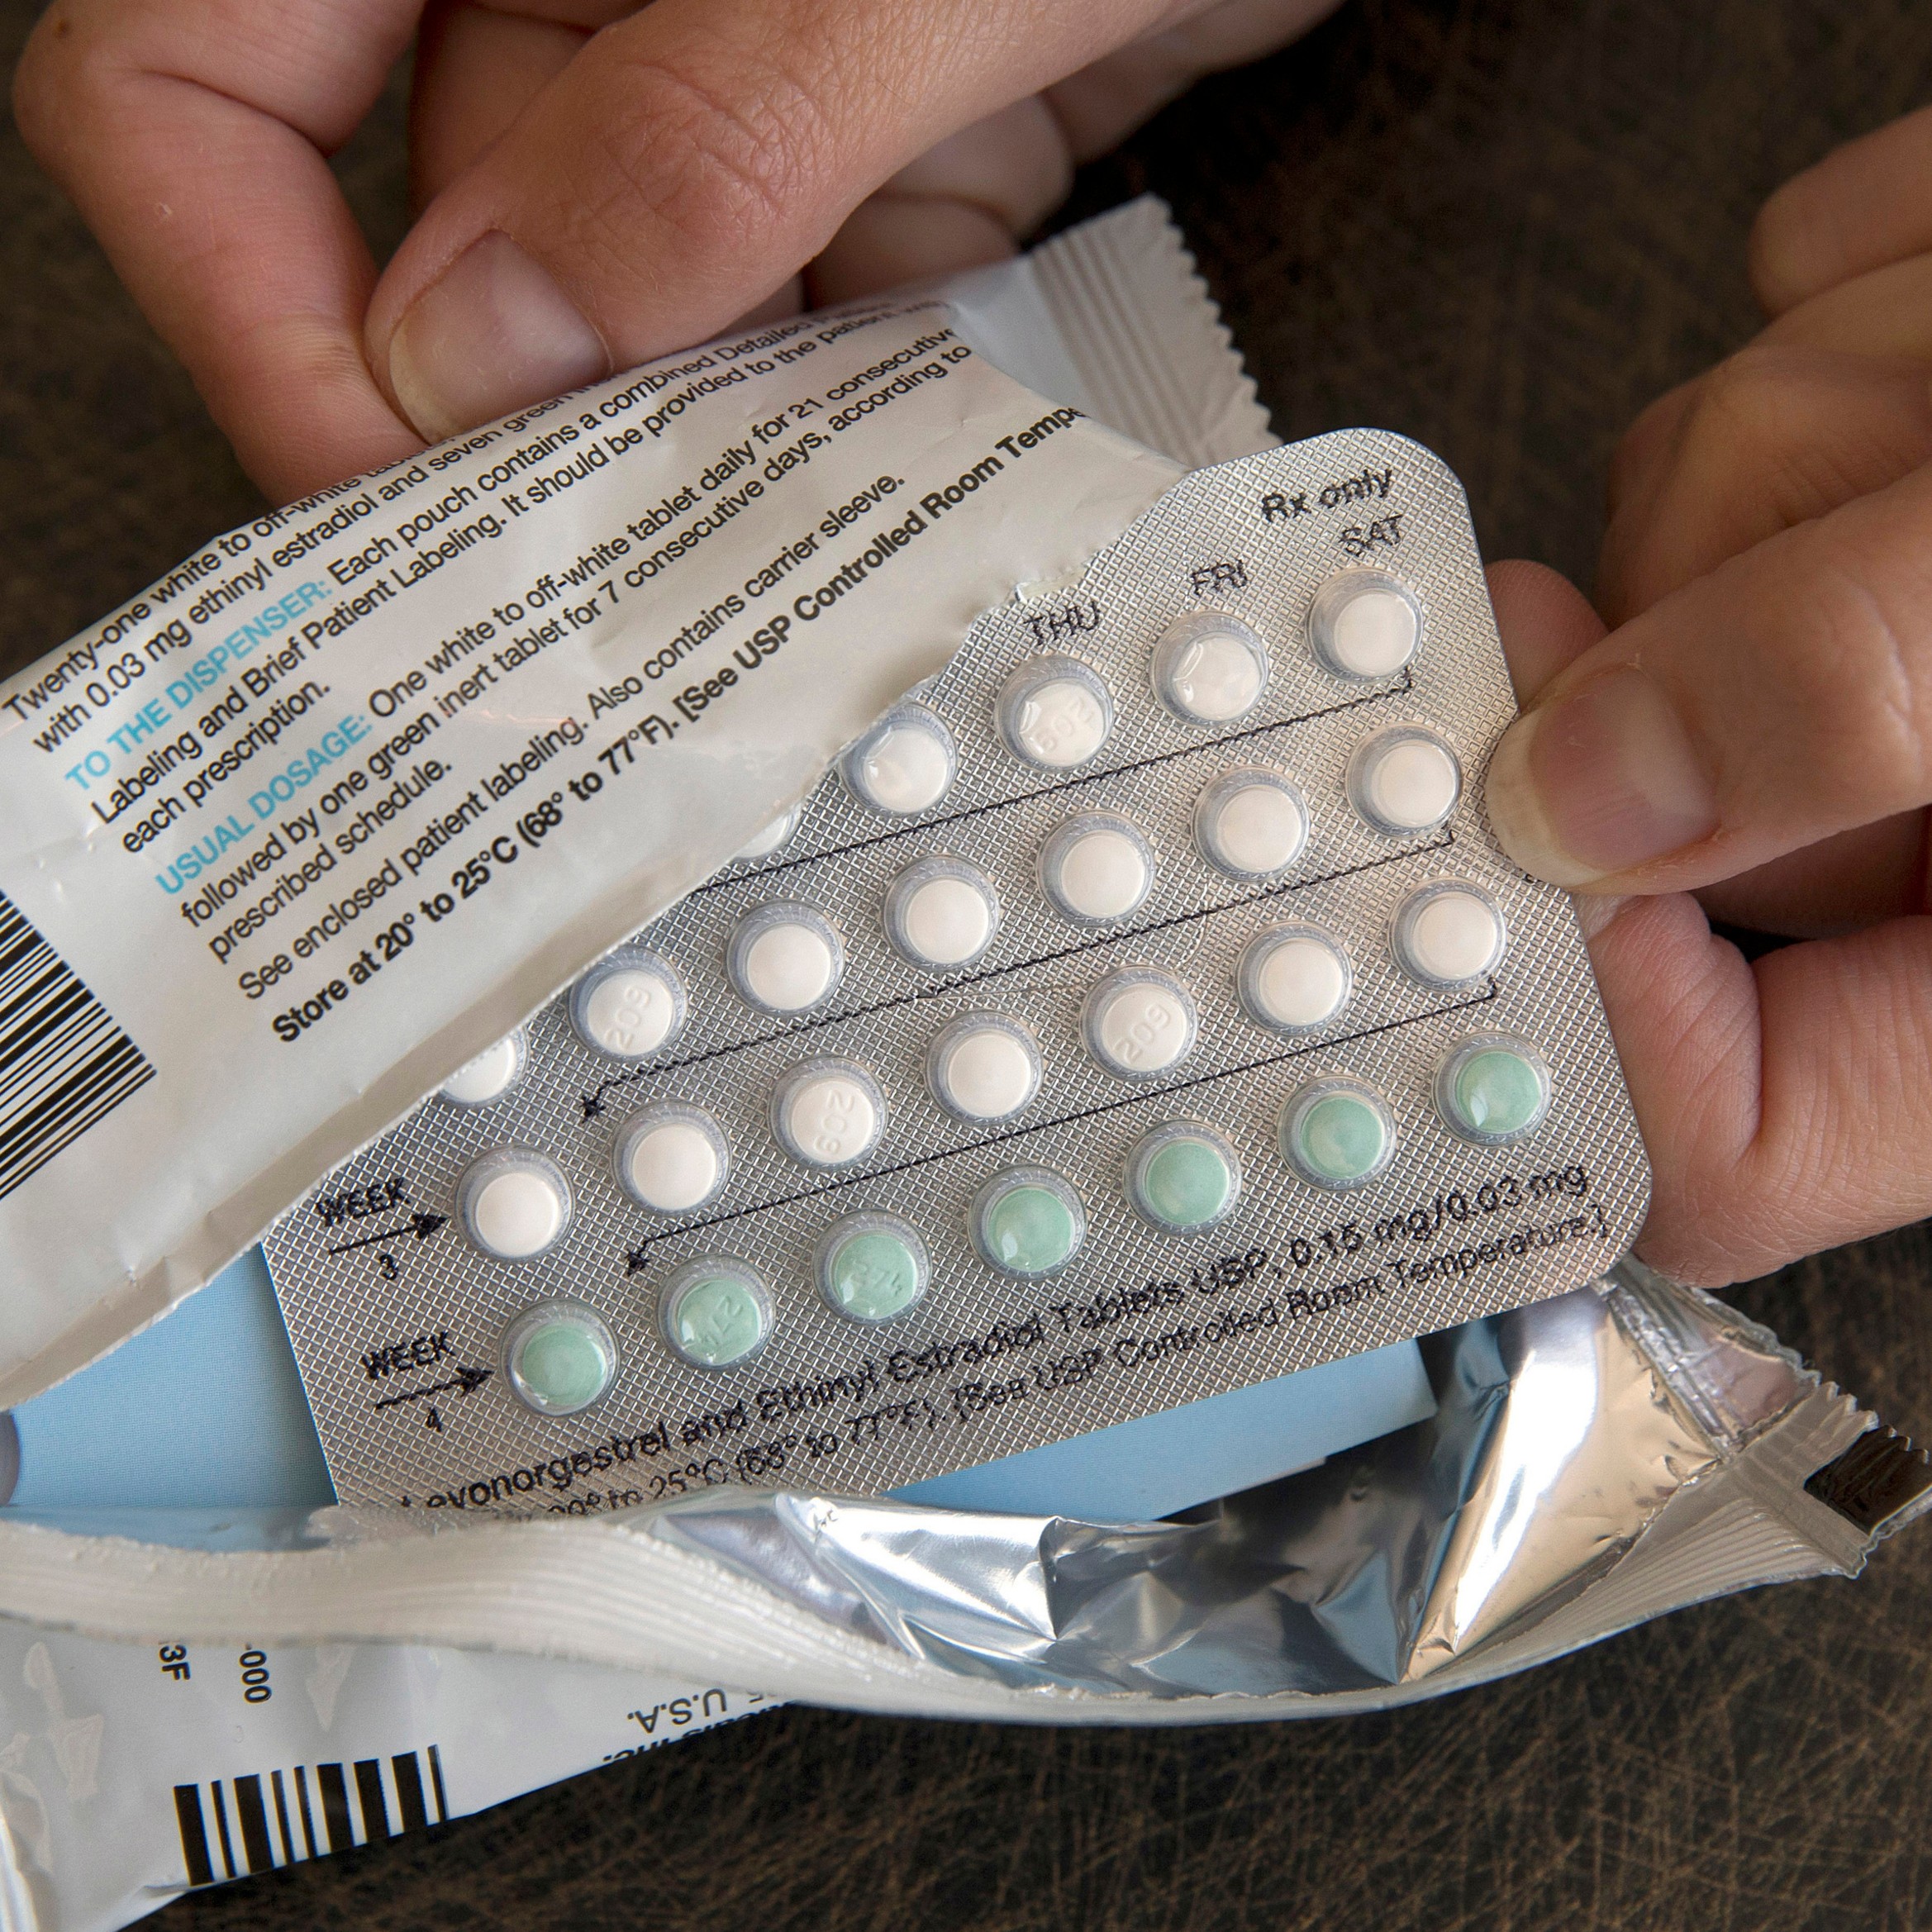 How Messing With Your Birth Control Affects Your Body